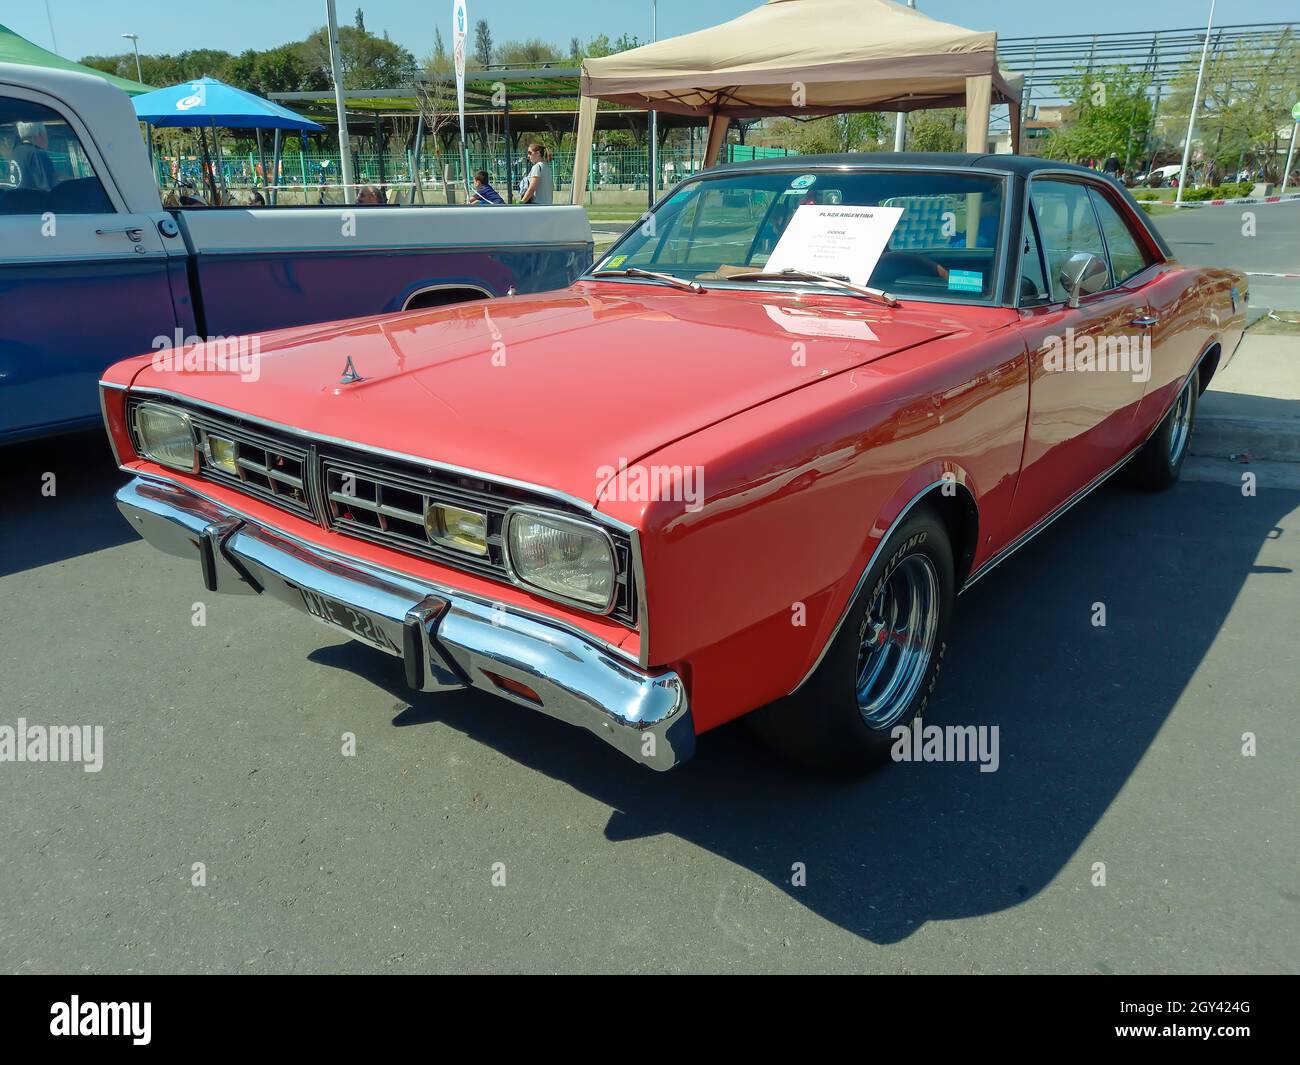 AVELLANEDA - ARGENTINA, ARGENTINA - Sep 27, 2021: Dodge GTX Slant Six Power 1970 classic 2 door red convertible coupe. Sporty muscle car manufactured Stock Photo